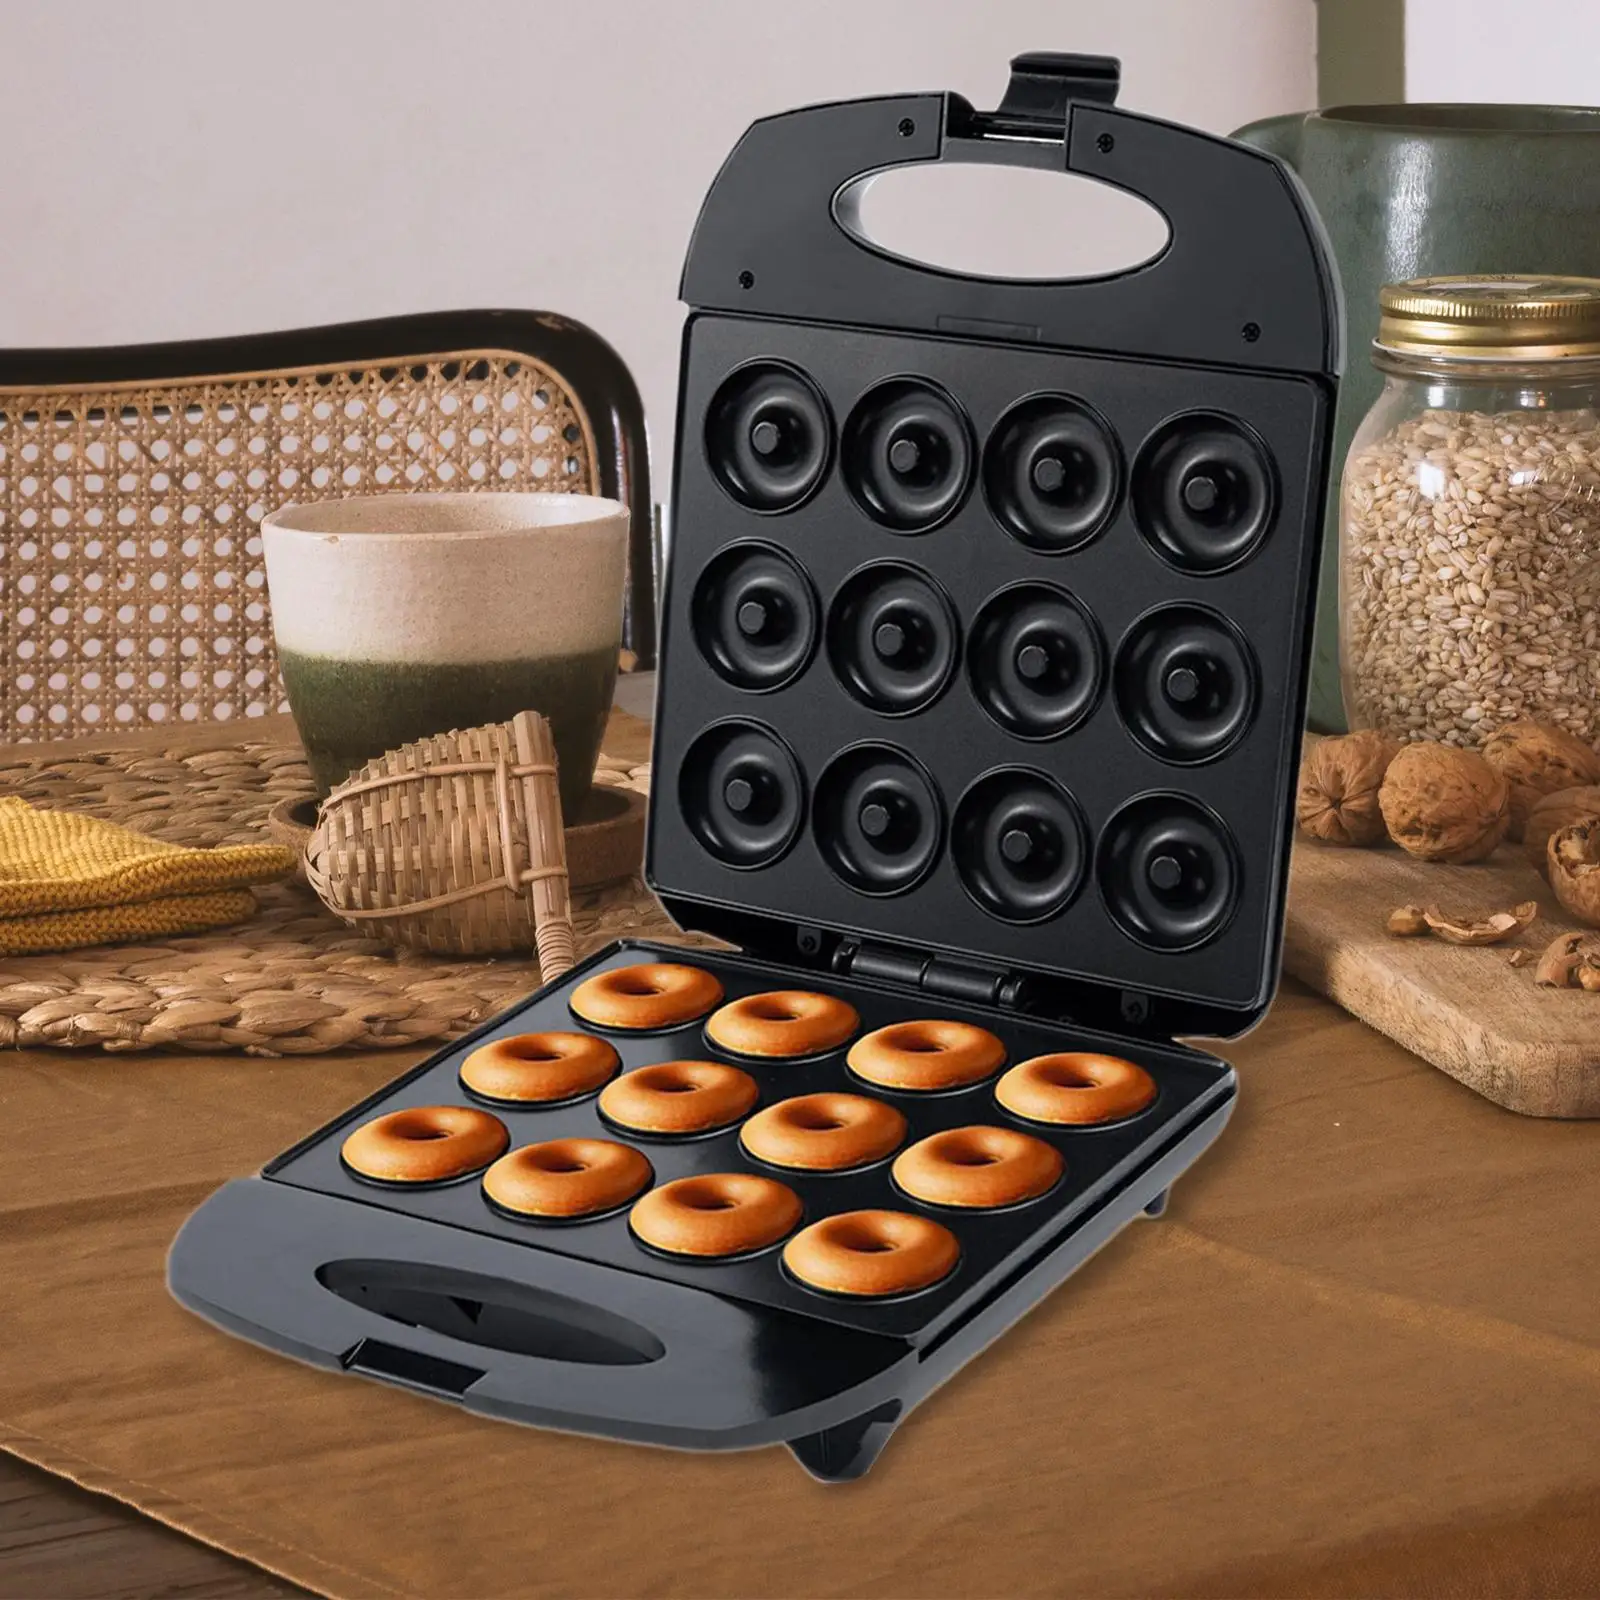 Donut Maker with Reminder Light Baking Tool Automatic Heating Egg Cake Bread Baking Machine for Coffee Shop Breakfast Snack